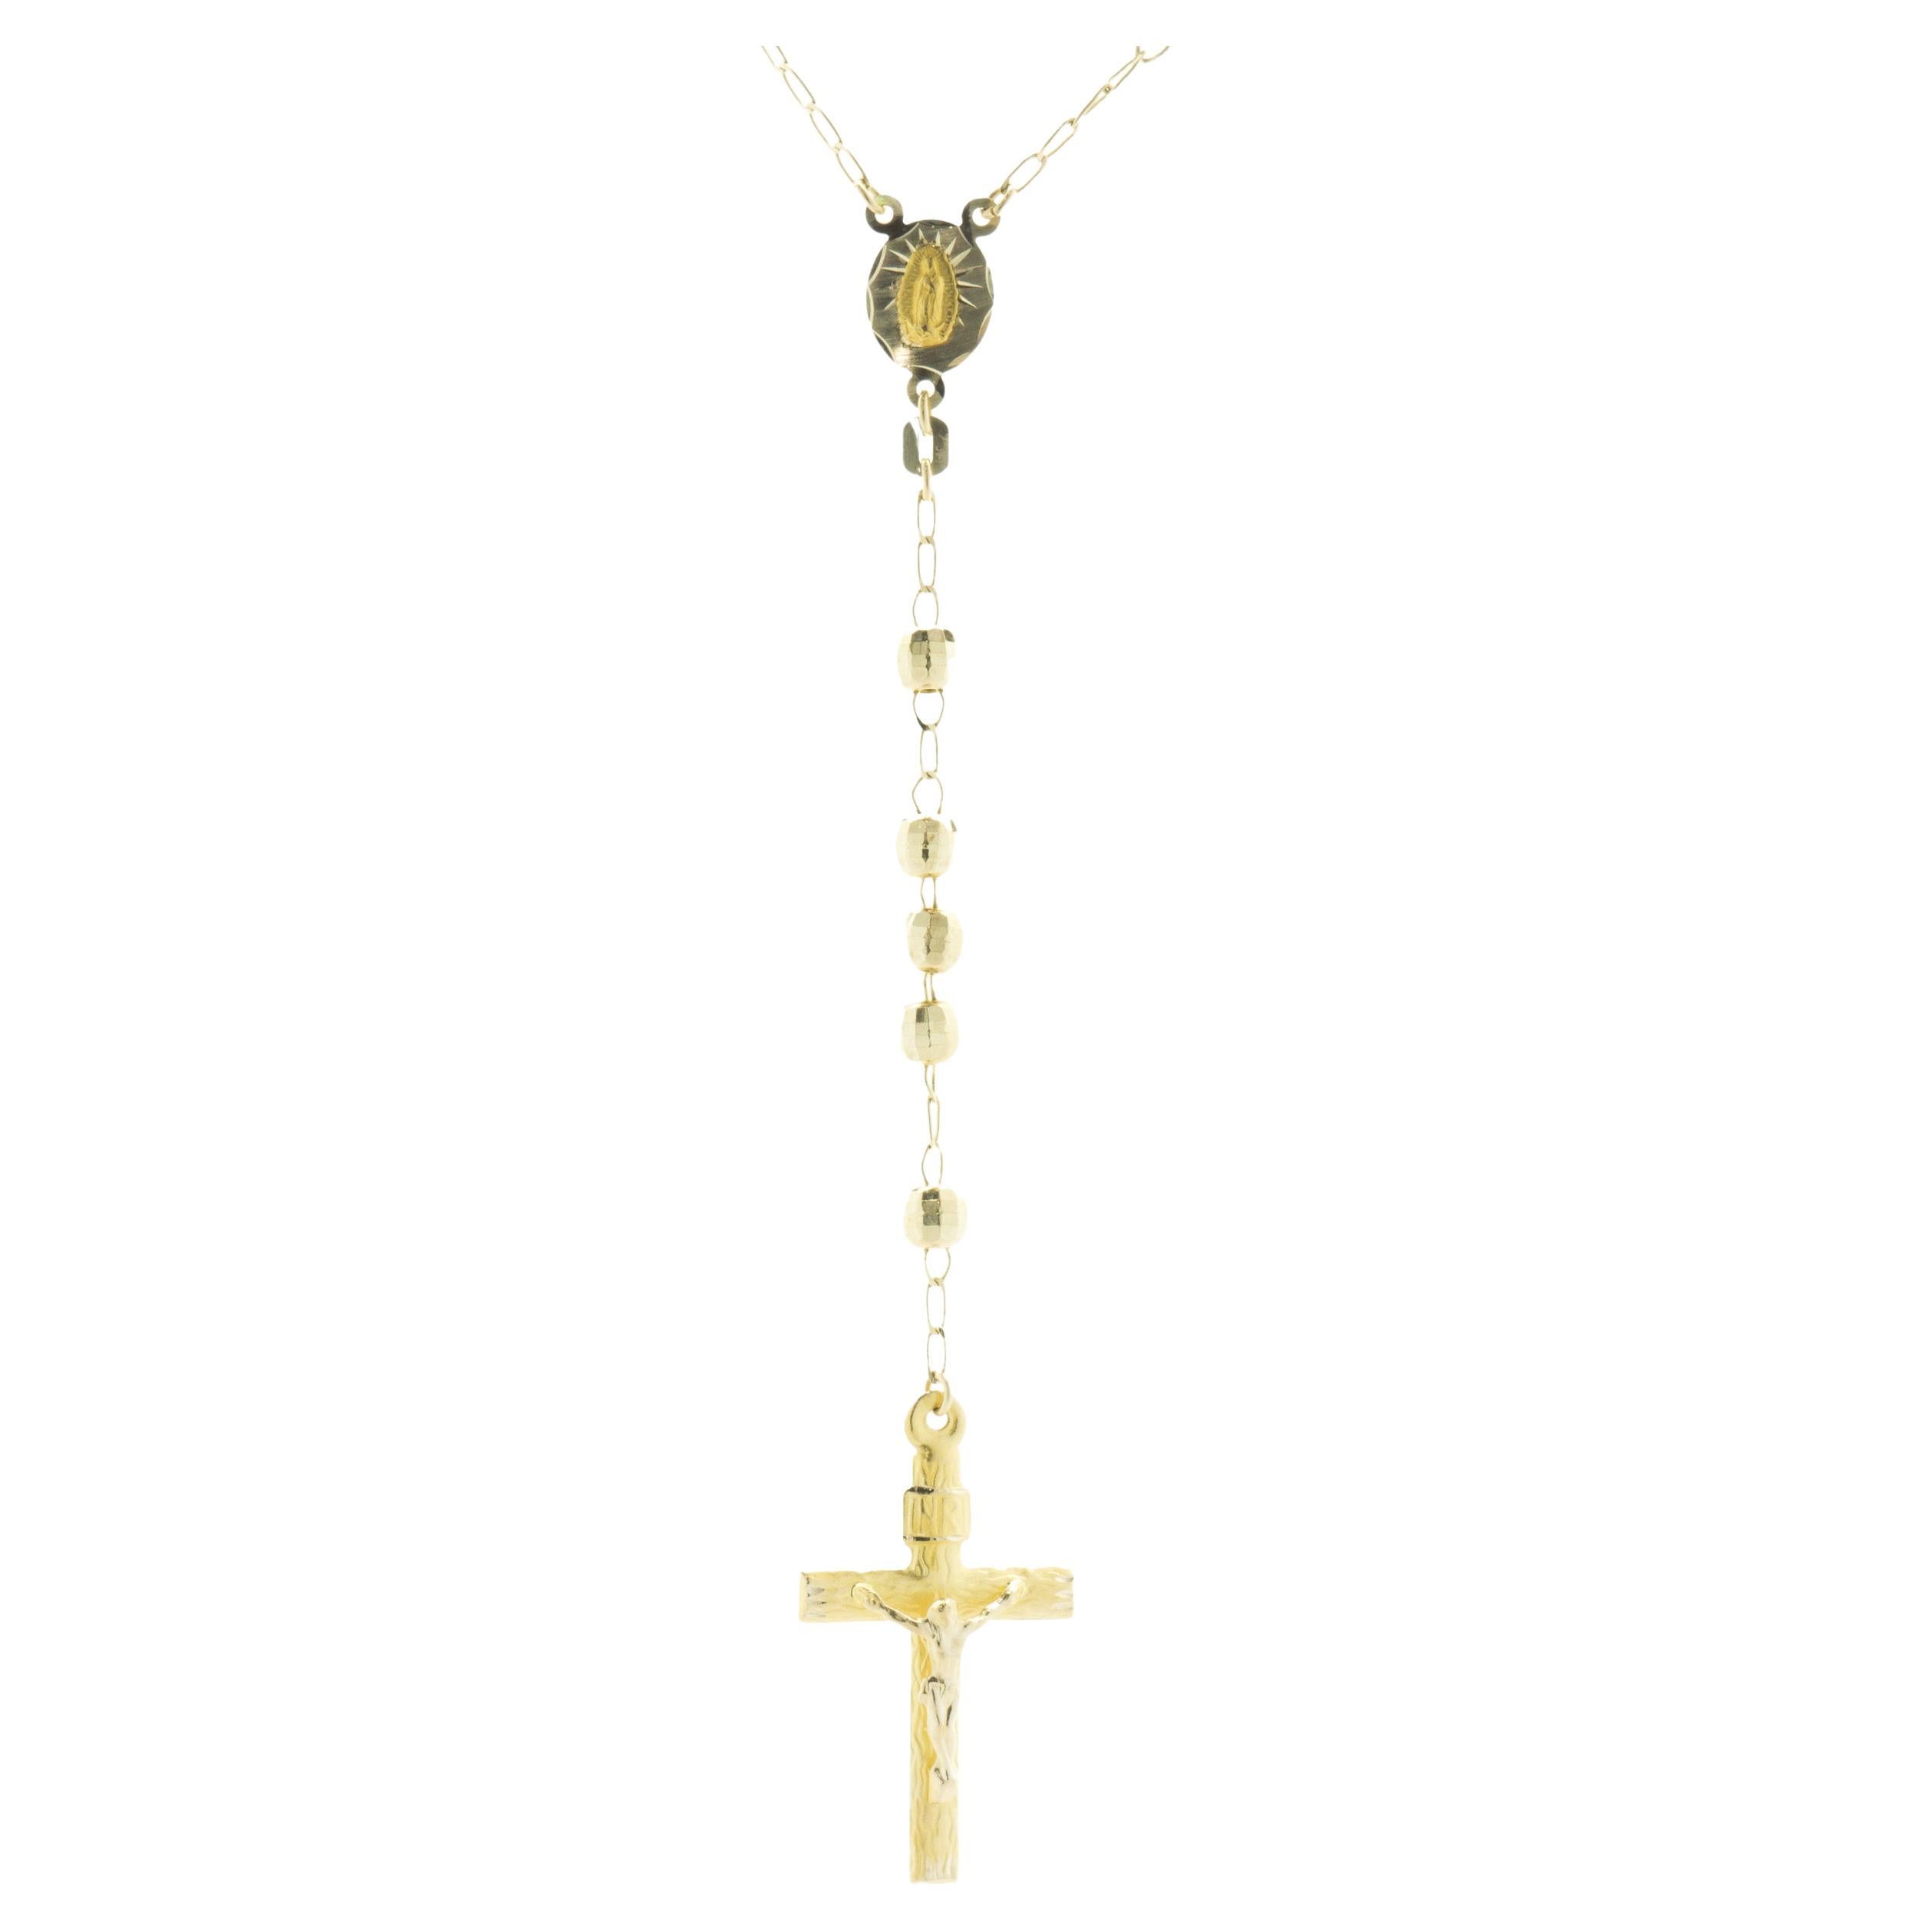 What is a rosary necklace?